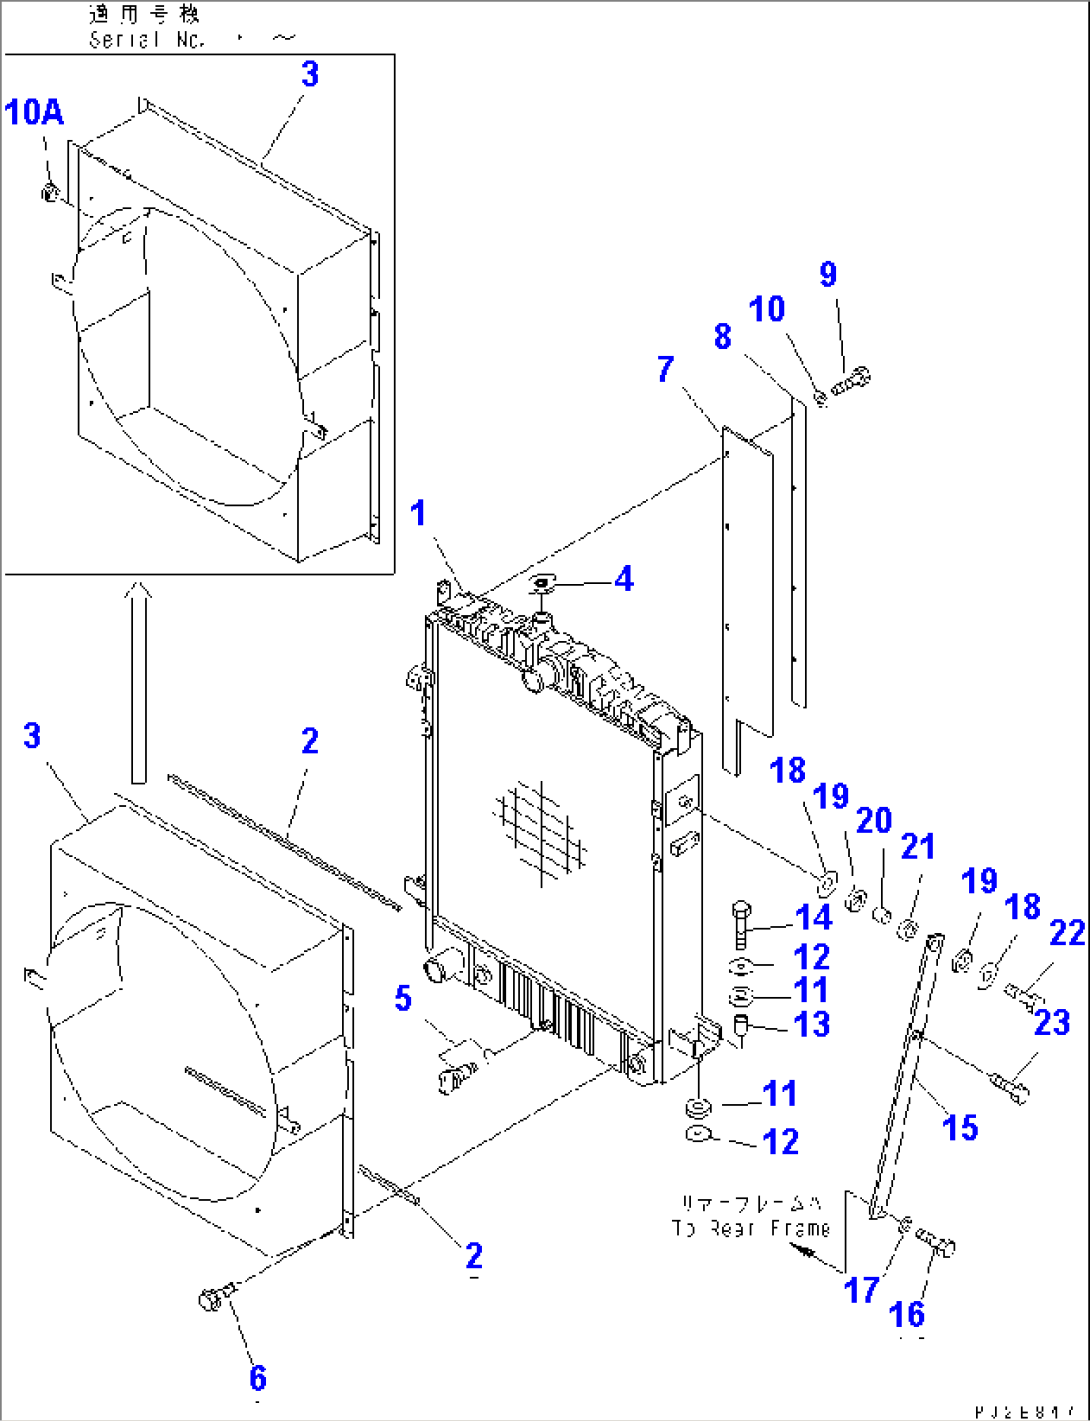 RADIATOR AND MOUNTING PARTS(#50001-51000)